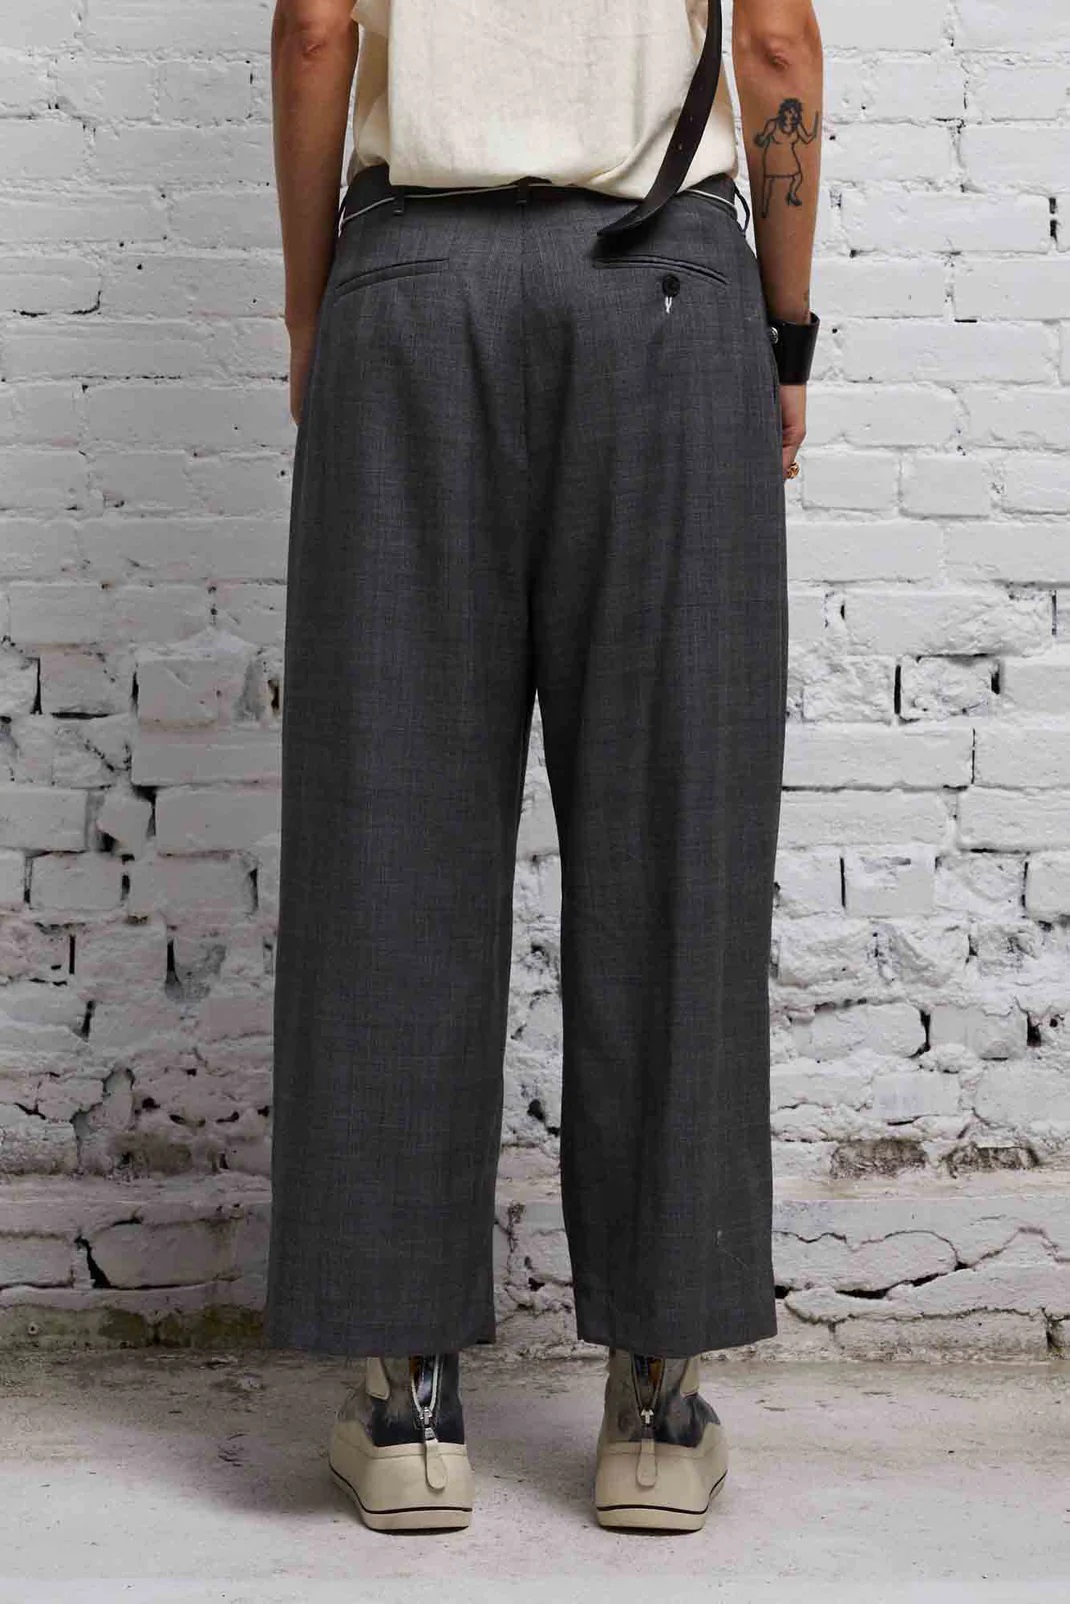 R13 Articulated Knee Trouser Grey Plaid 27